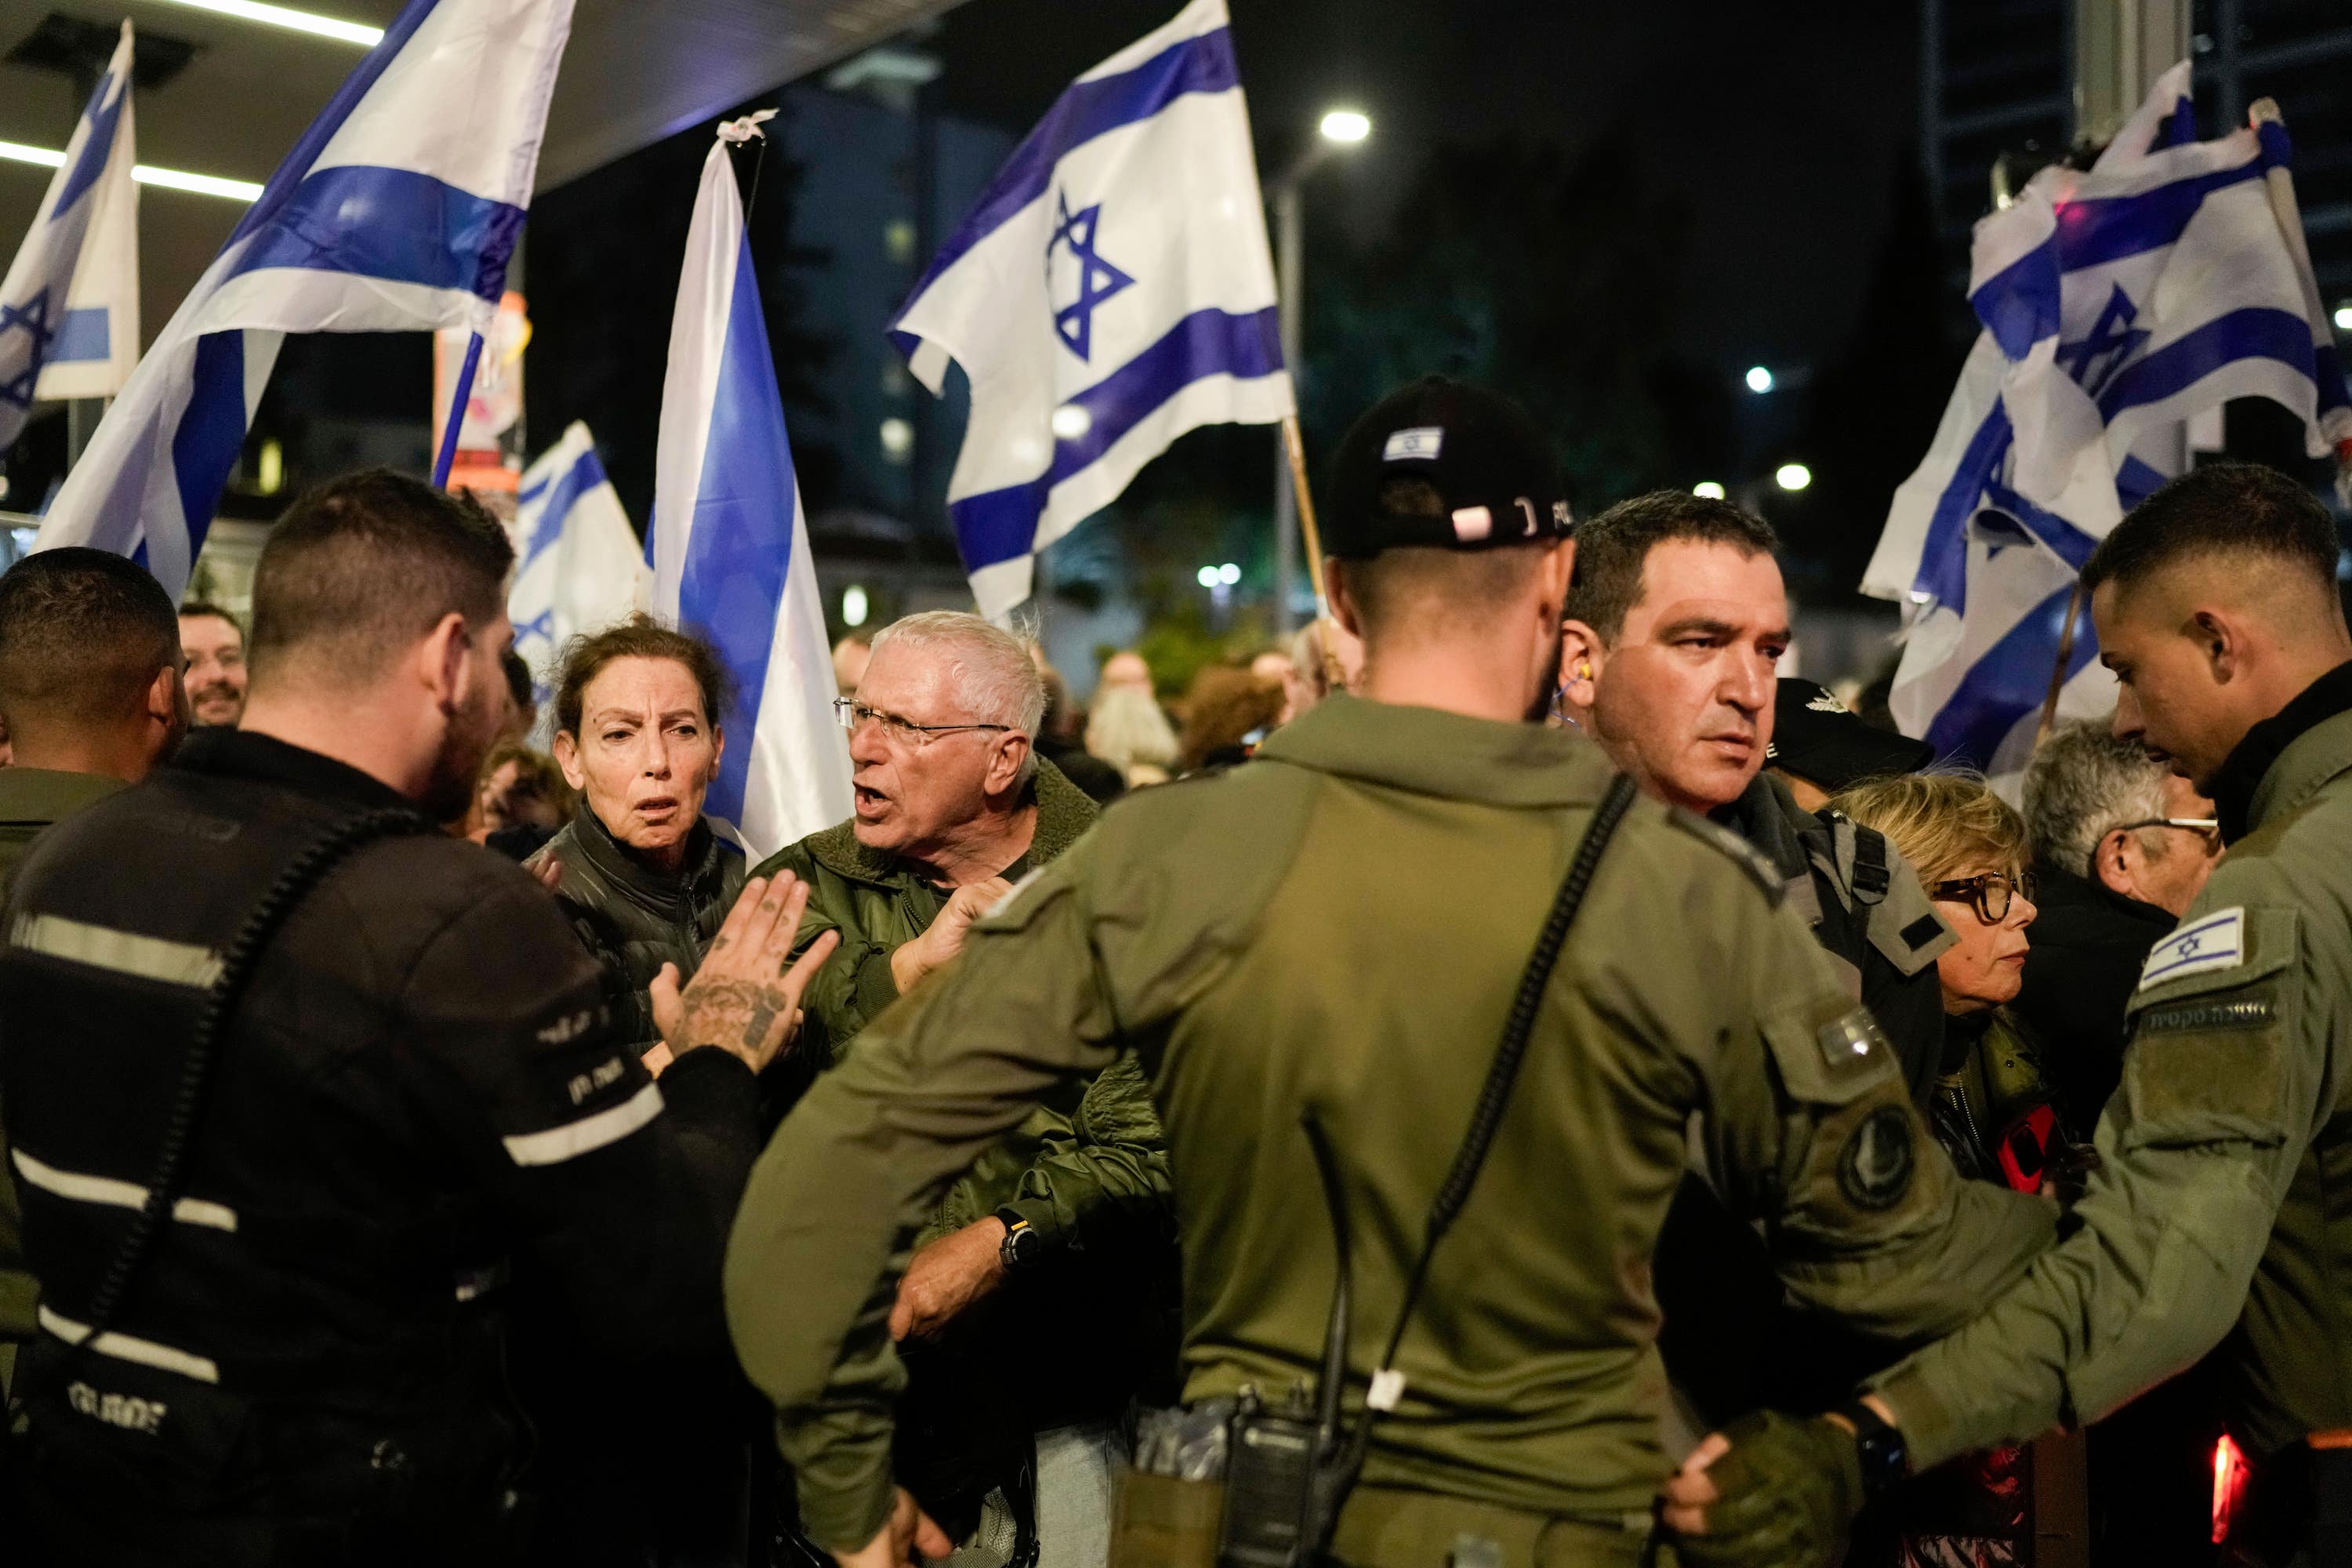 A protest against Israeli Prime Minister Benjamin Netanyahu’s government took place in Tel Aviv on Saturday.